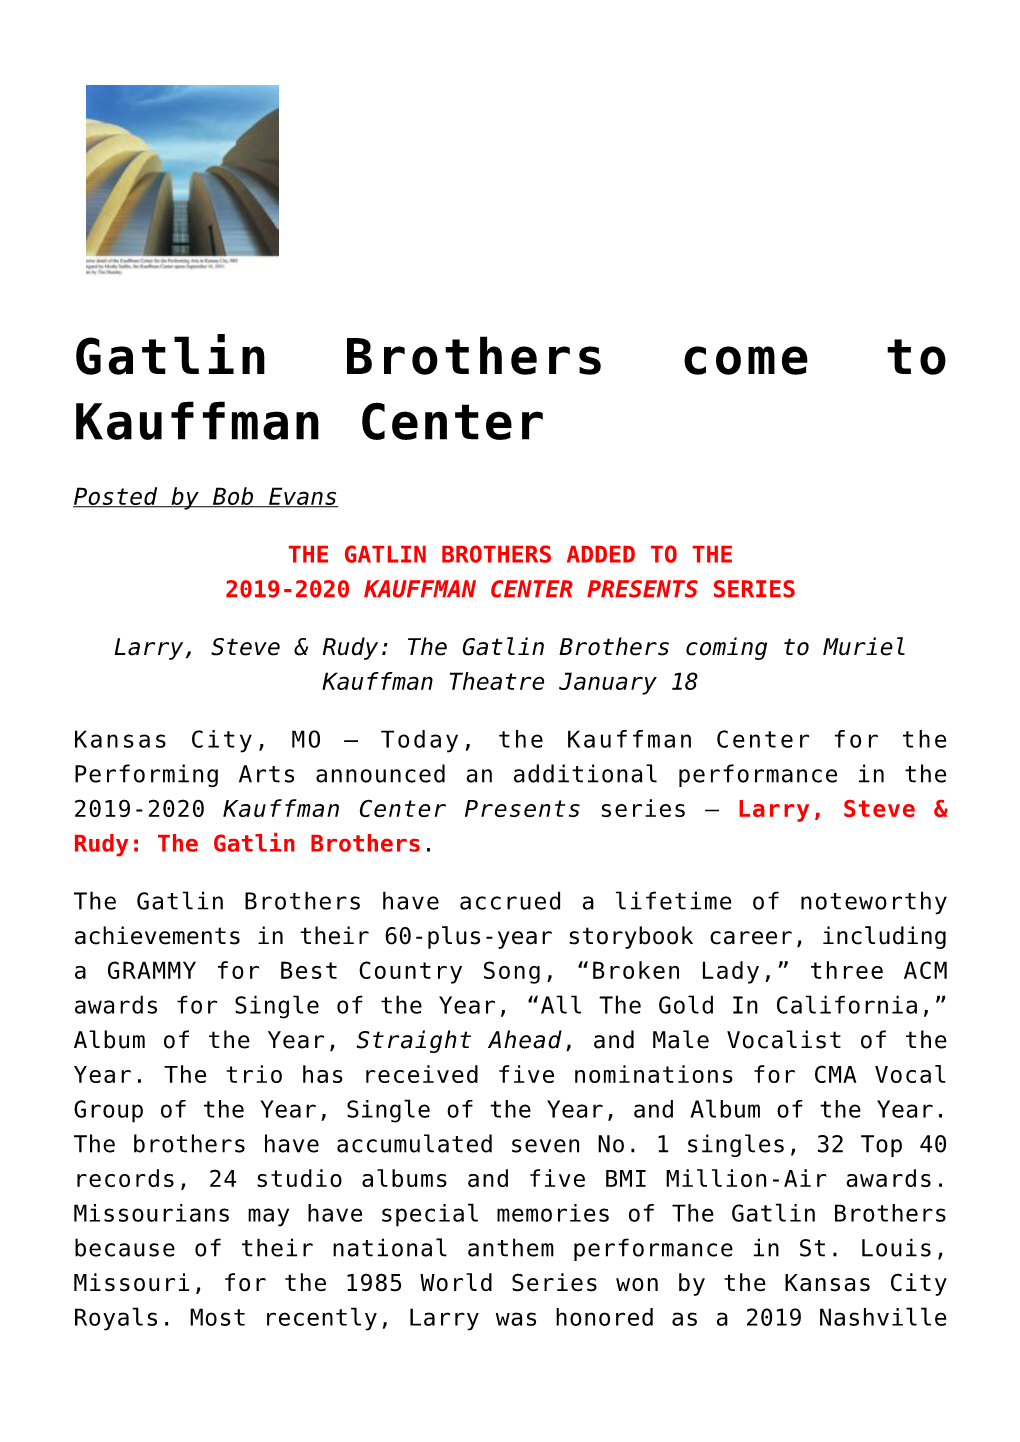 Gatlin Brothers Come to Kauffman Center